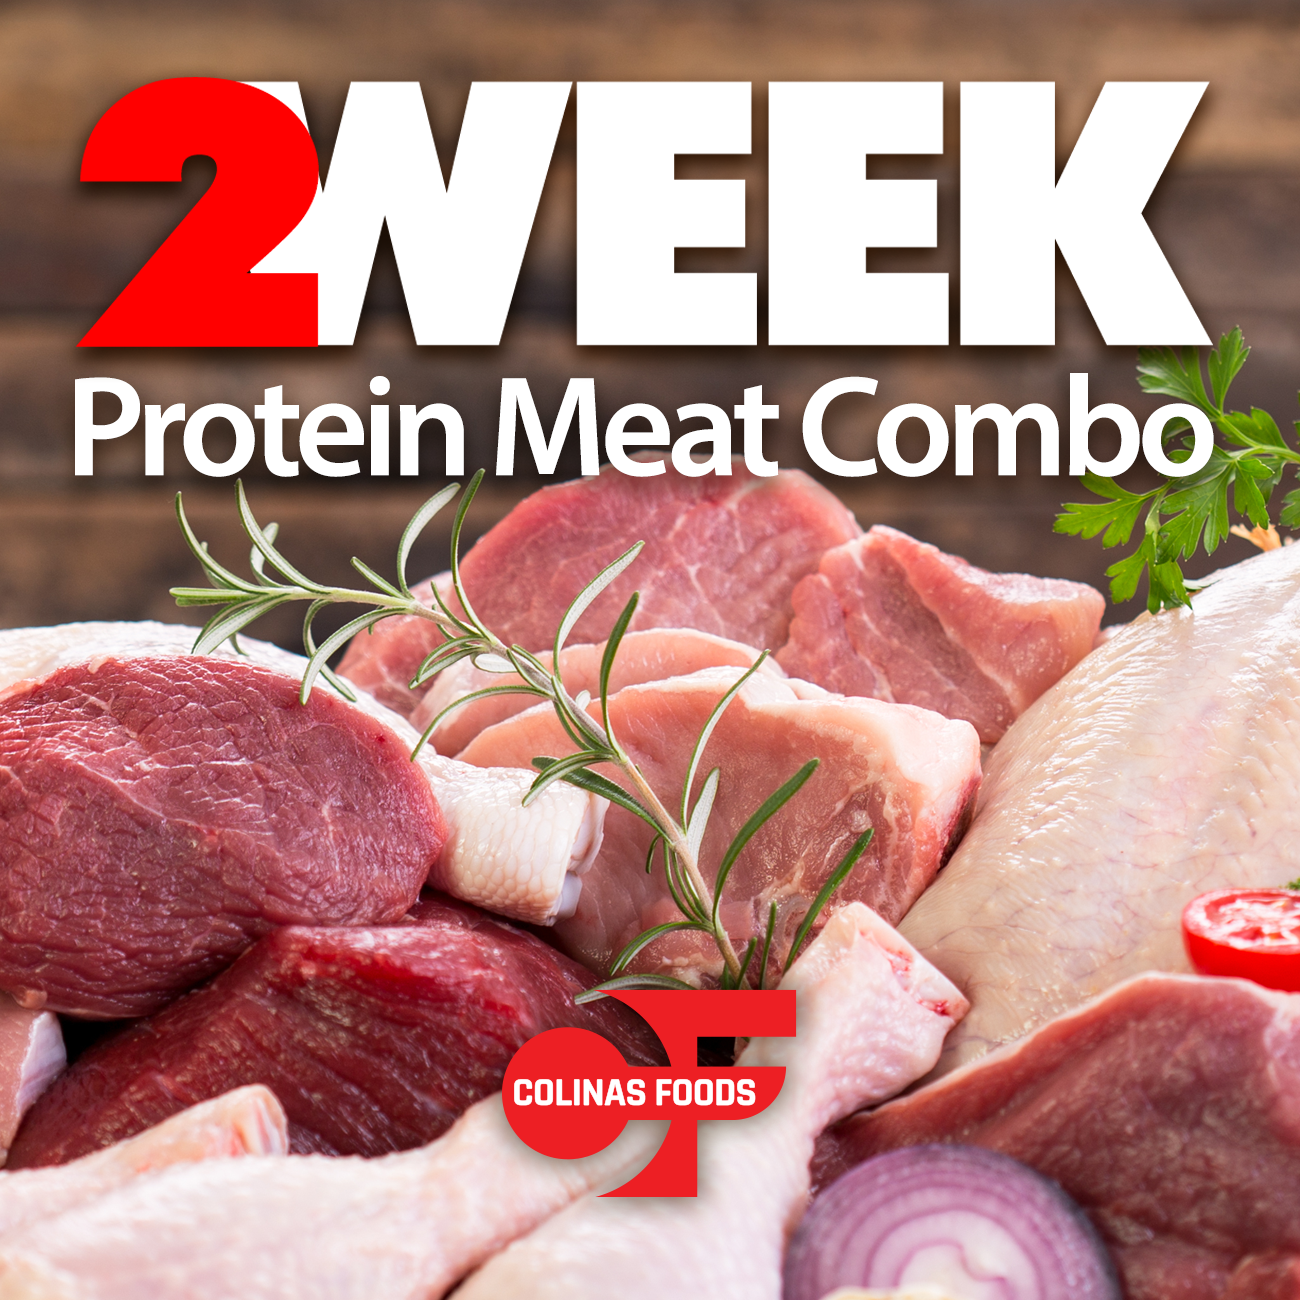 Two Week Protein Meat Combo